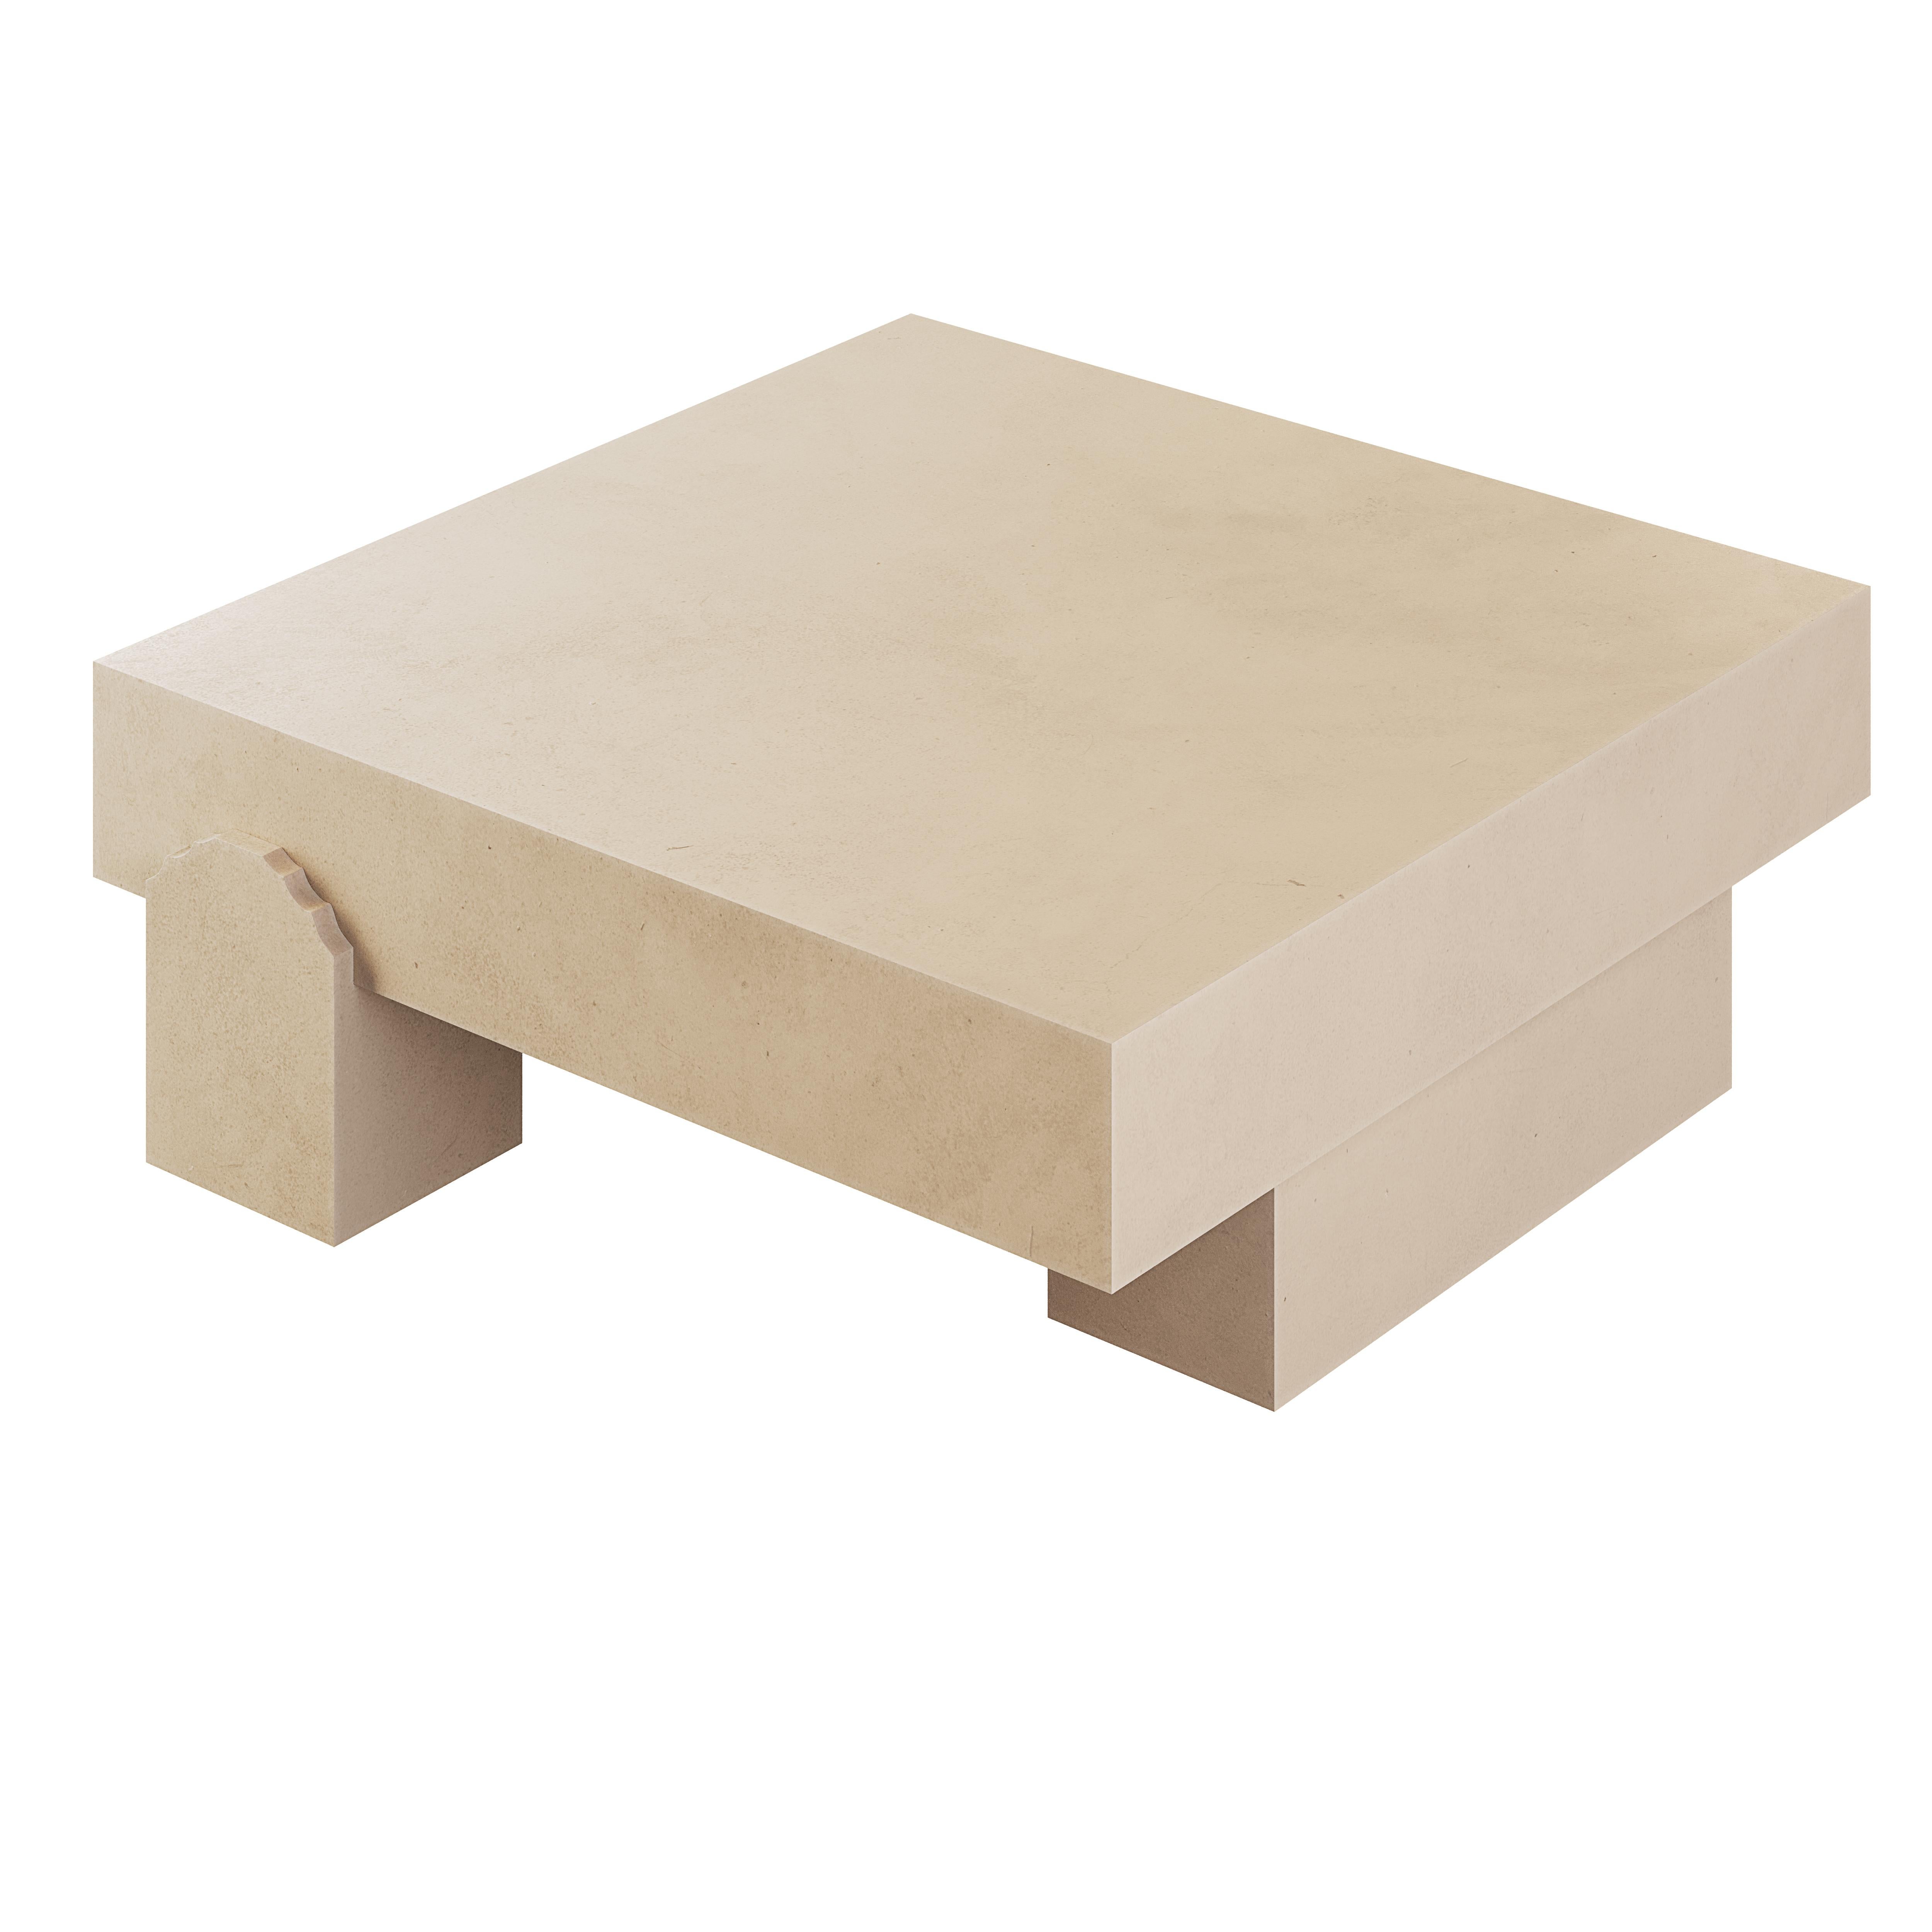 Dyed Modern Brutalist Coffee Table in Micro-Cement Sand Color For Sale